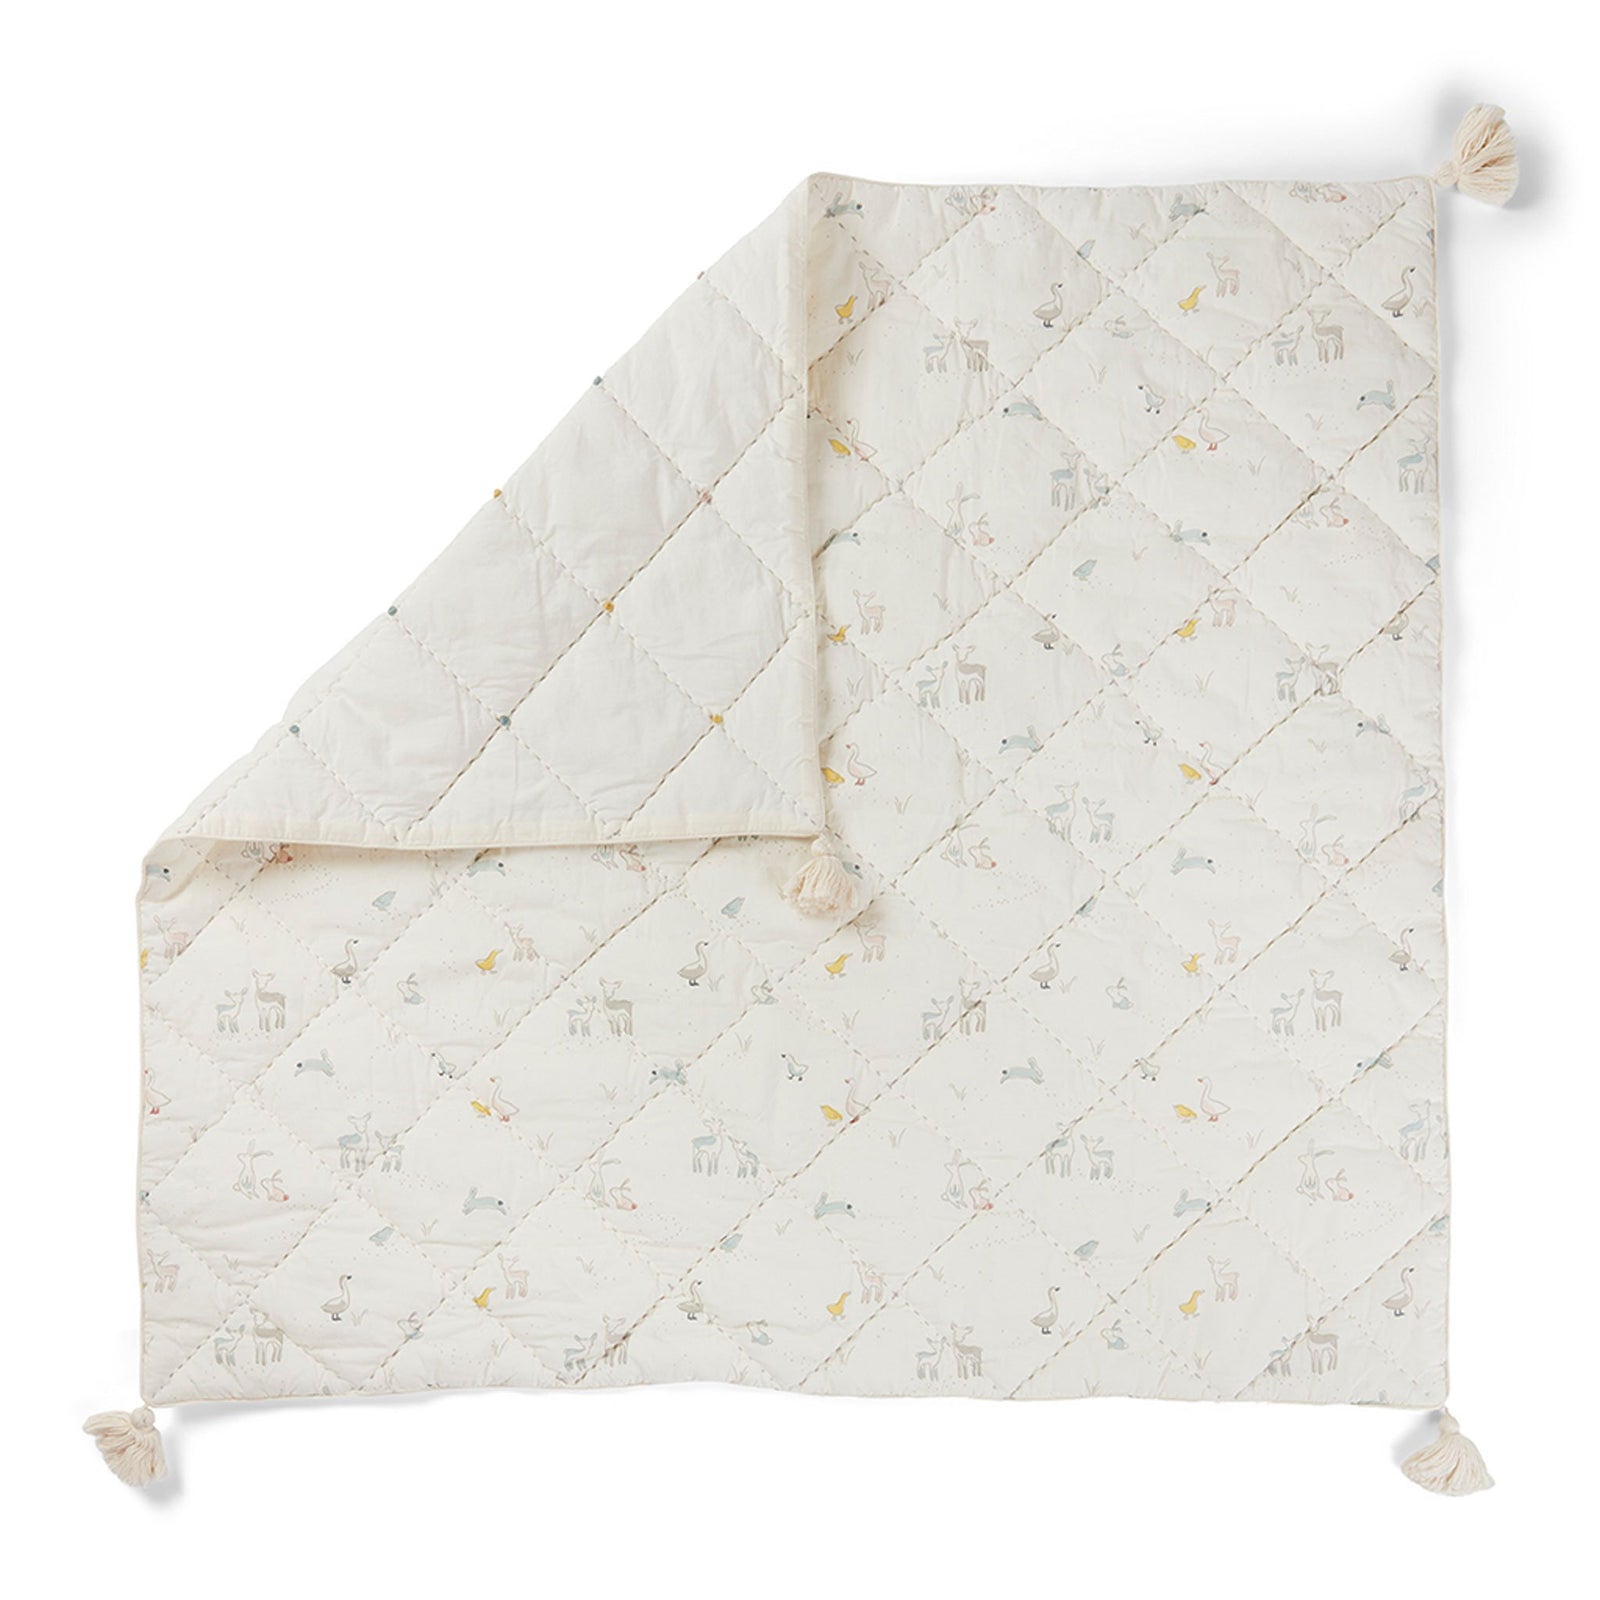 Pehr Just Hatched Blanket. Hand printed. White with baby animals, tassels on corners.